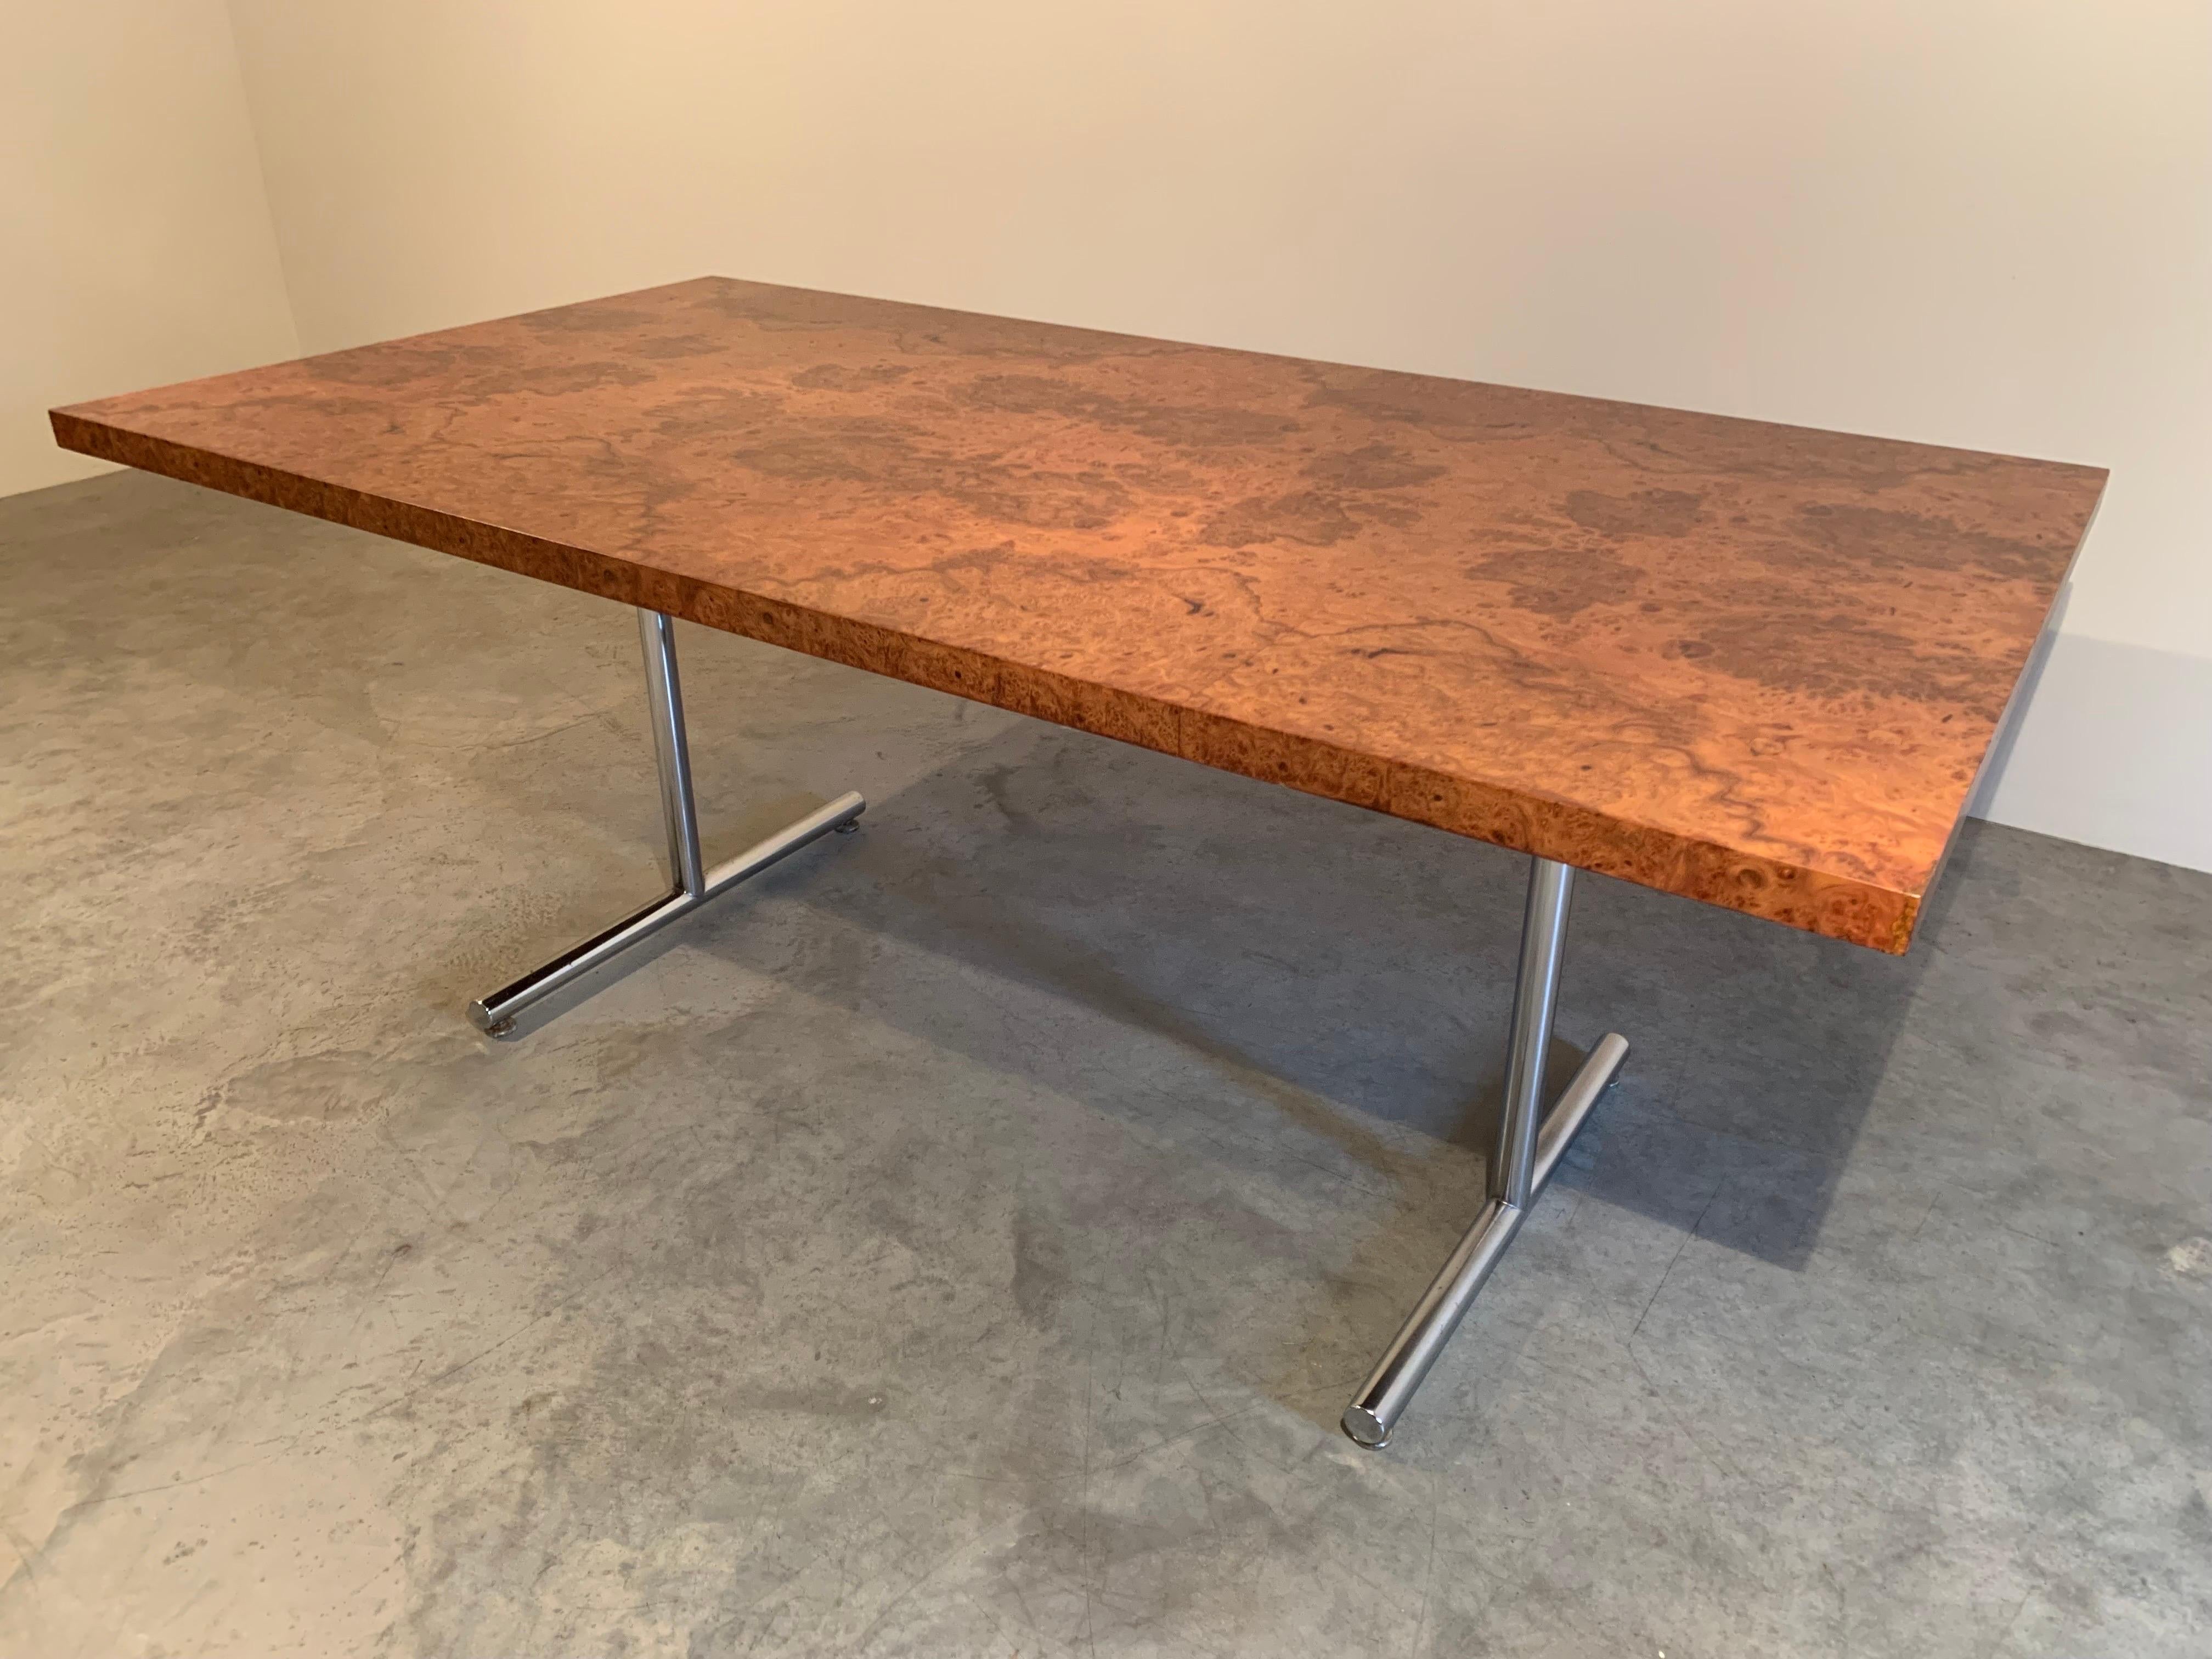 “Omega” desk or table in burlwood having chromed steel legs. Designed by Hans Eichenberger, made by Haussman and Hausmann fo Stendig. -Finland ca 1970

In beautiful overall condition. The top is stunning.